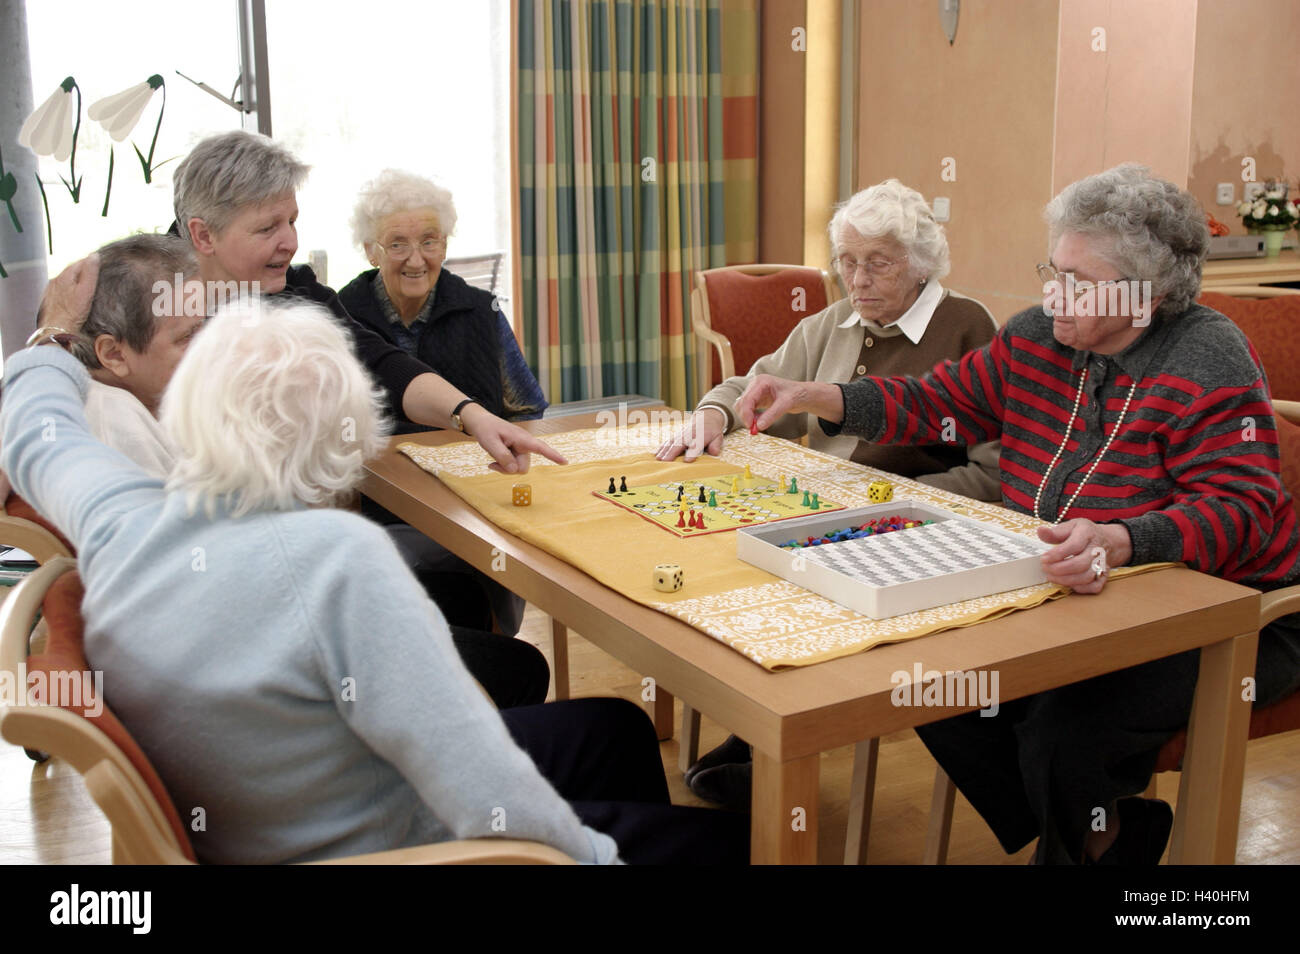 Old people's home, seniors, parlour game, old people's home, nursing home, senior citizen's home, retirement home, day room, women, senior citizens, board game, game, Mensch-ärgere-Dich-nicht, play, pastime, activity, leisure time, amusement, together, en Stock Photo